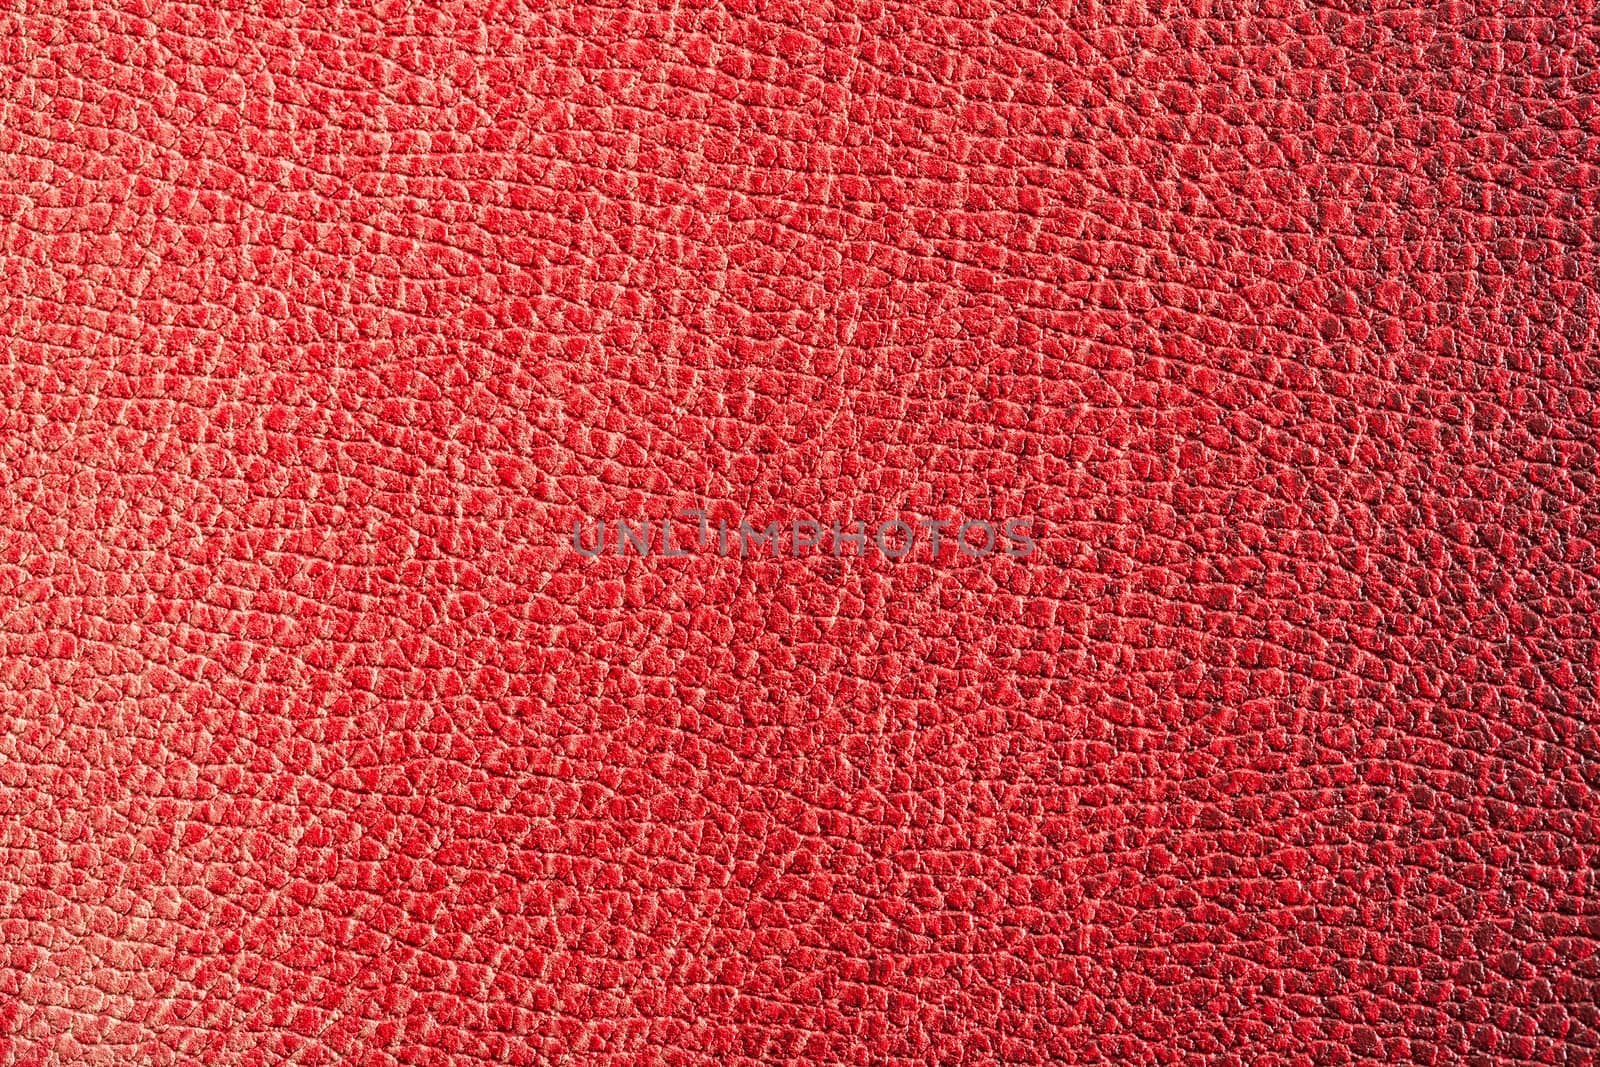 red leather texture high rezolution